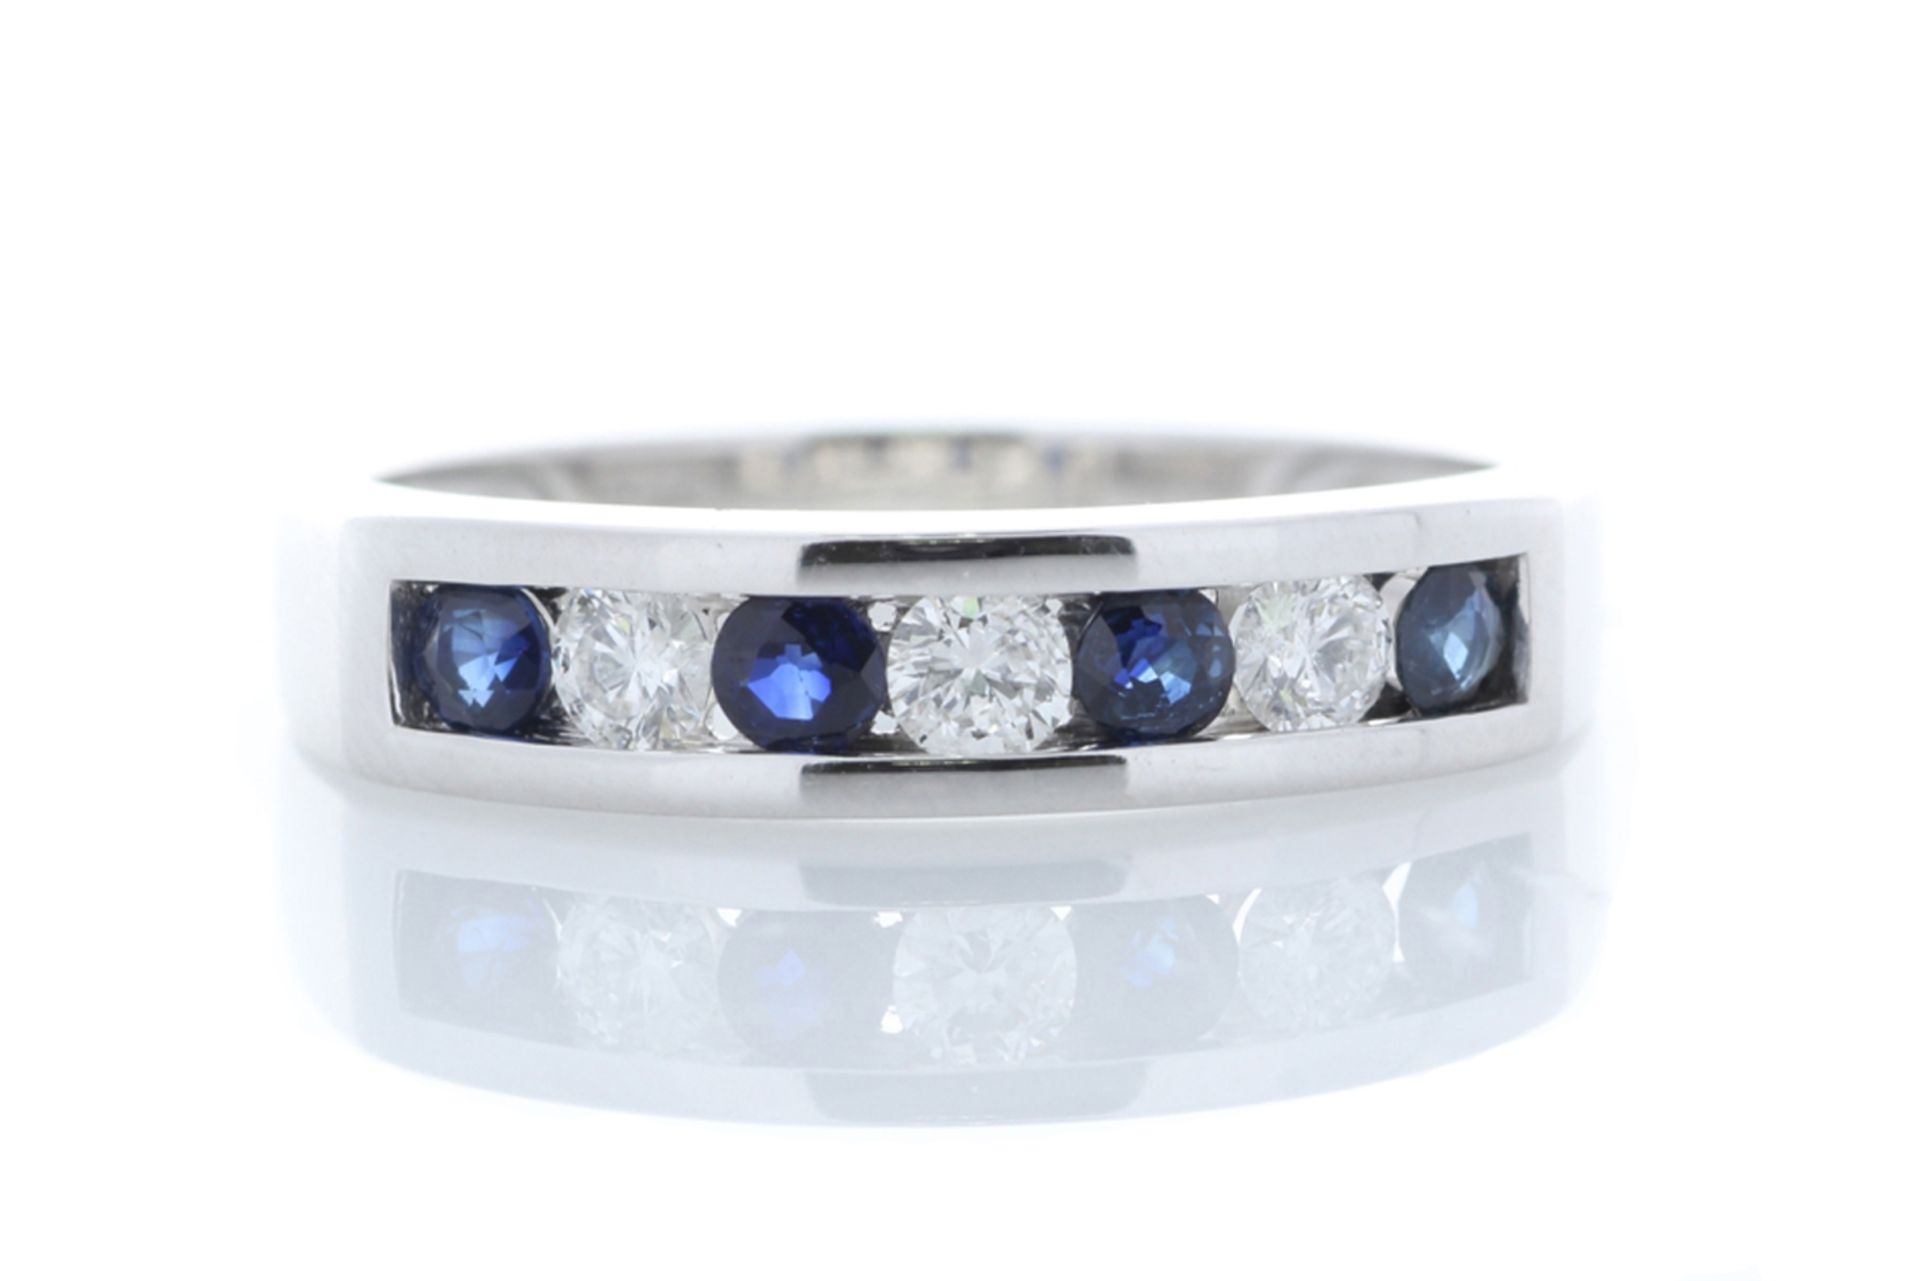 9ct White Gold Channel Set Semi Eternity Diamond And Sapphire Ring (S0.30) 0.25 Carats - Image 2 of 4